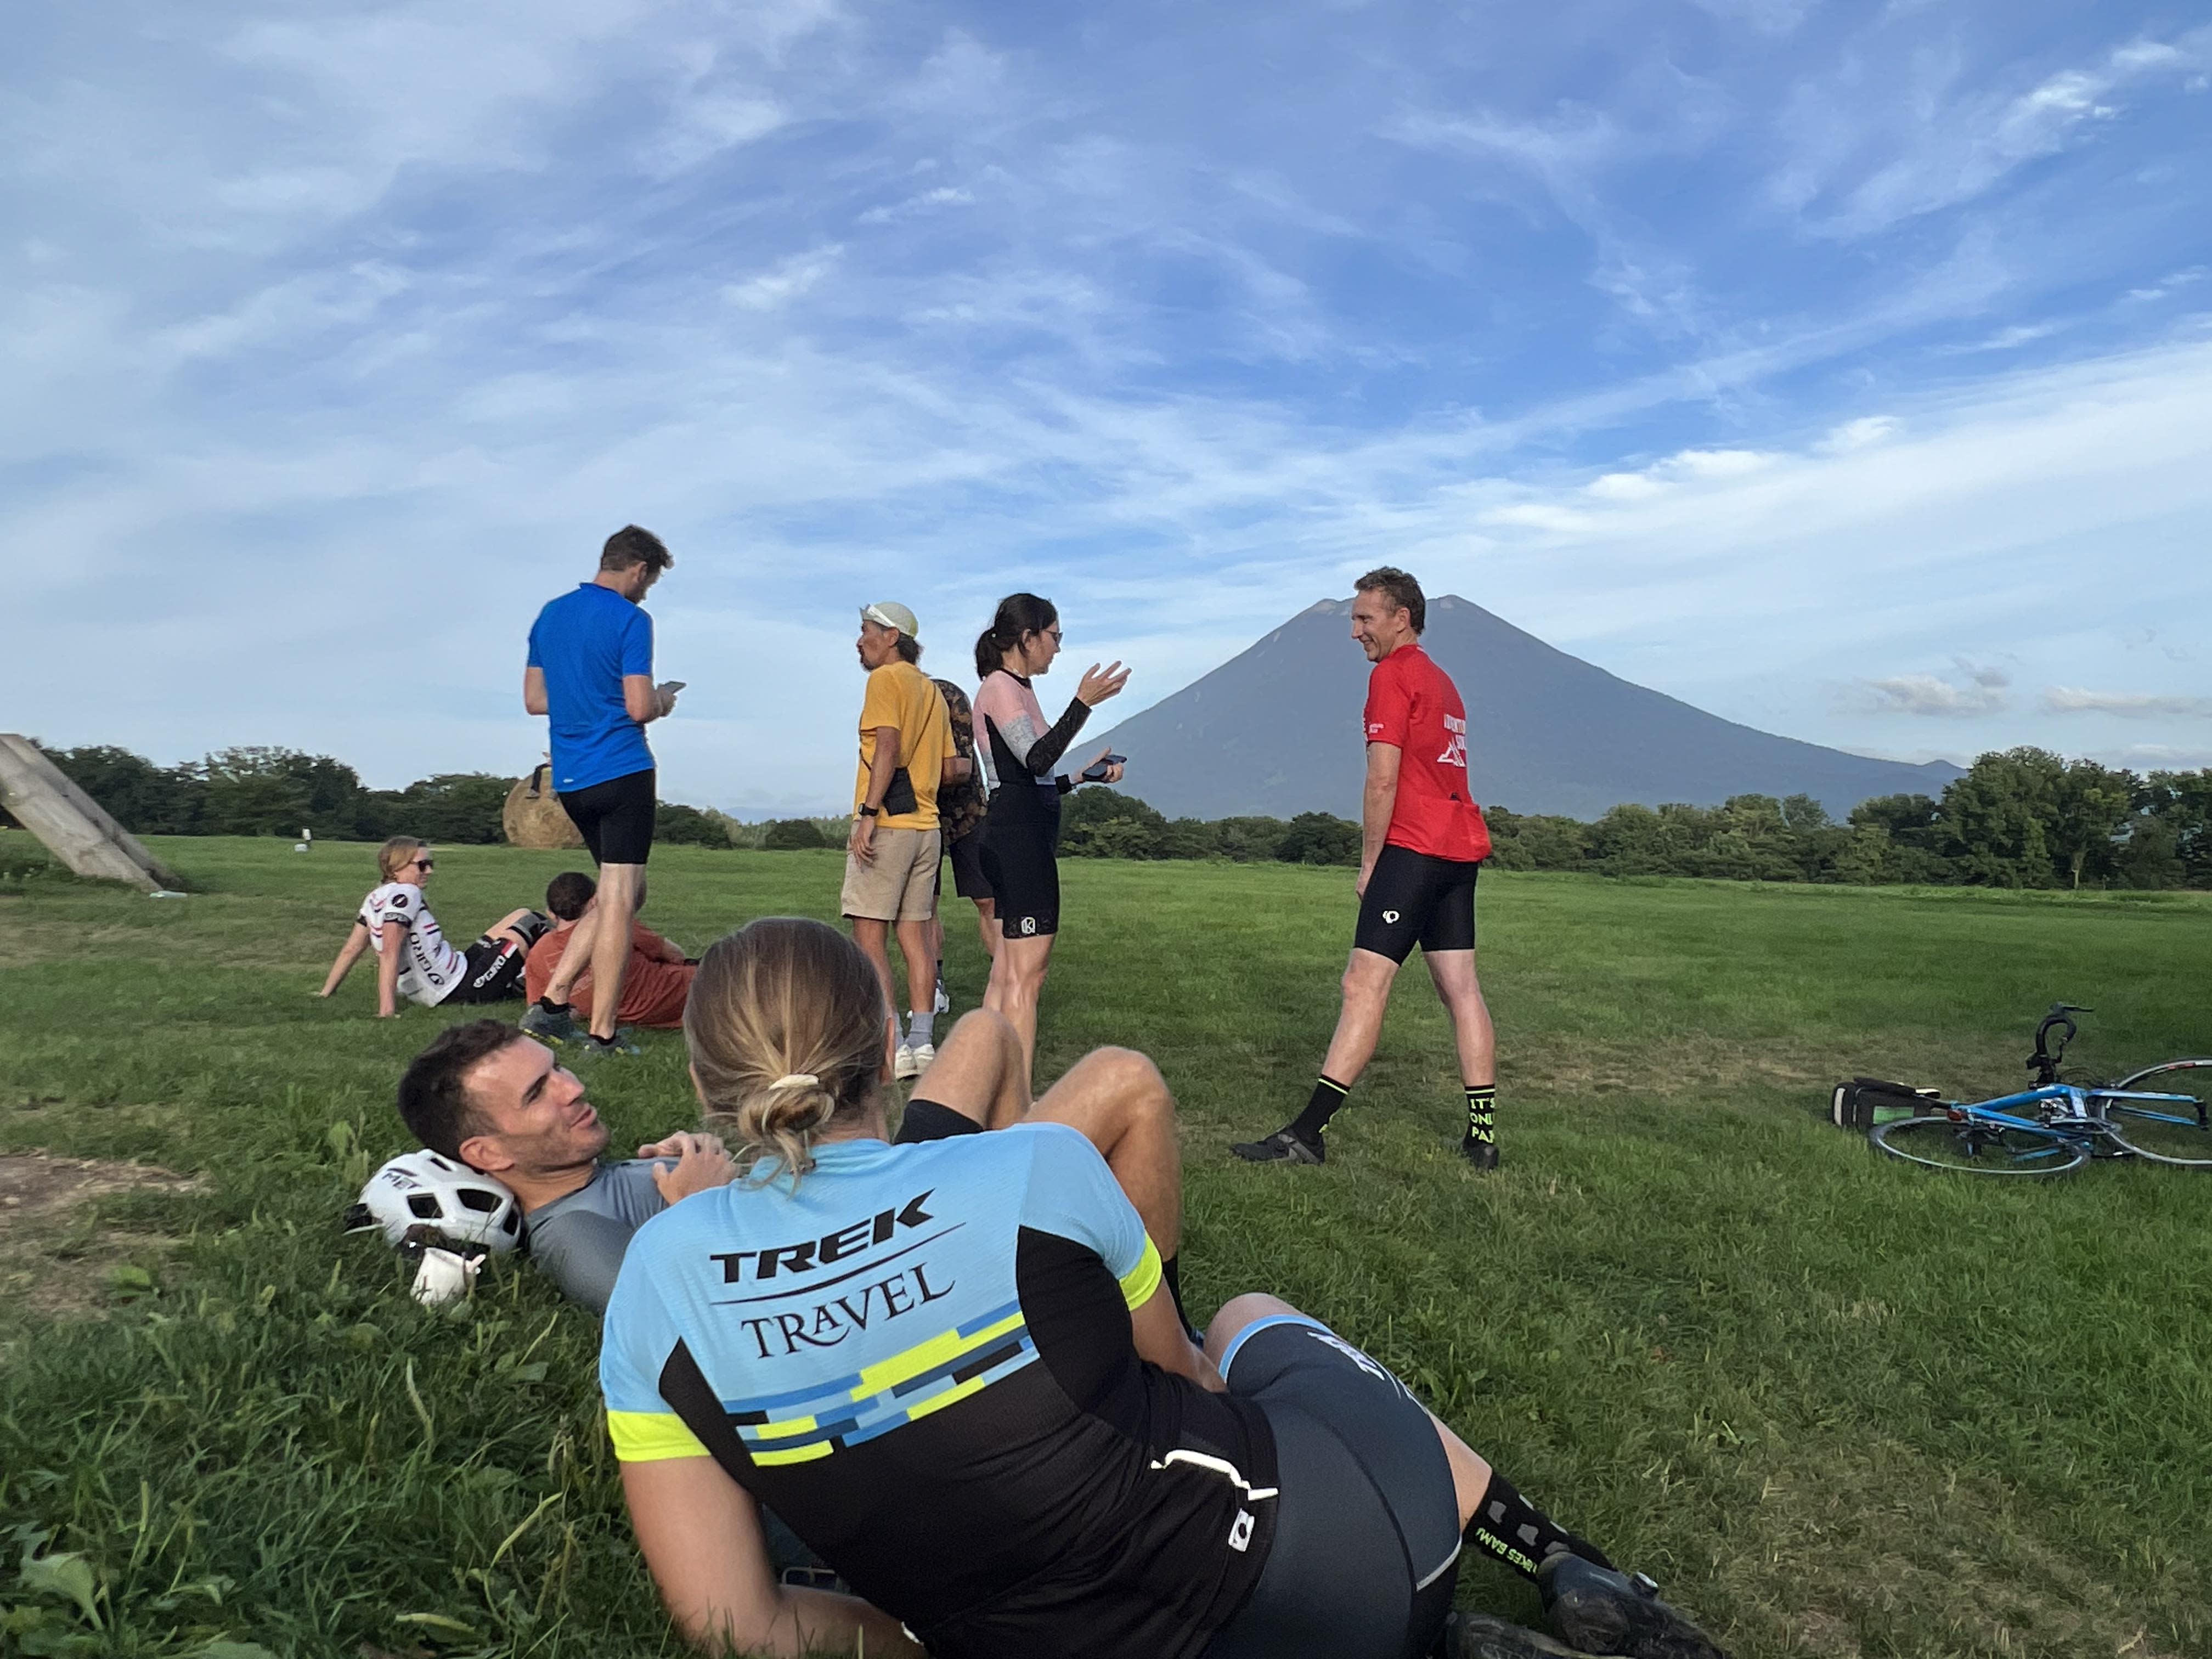 A group of cyclists take a well-deserved break after a long day of cycling with Mt. Yotei in the distance.